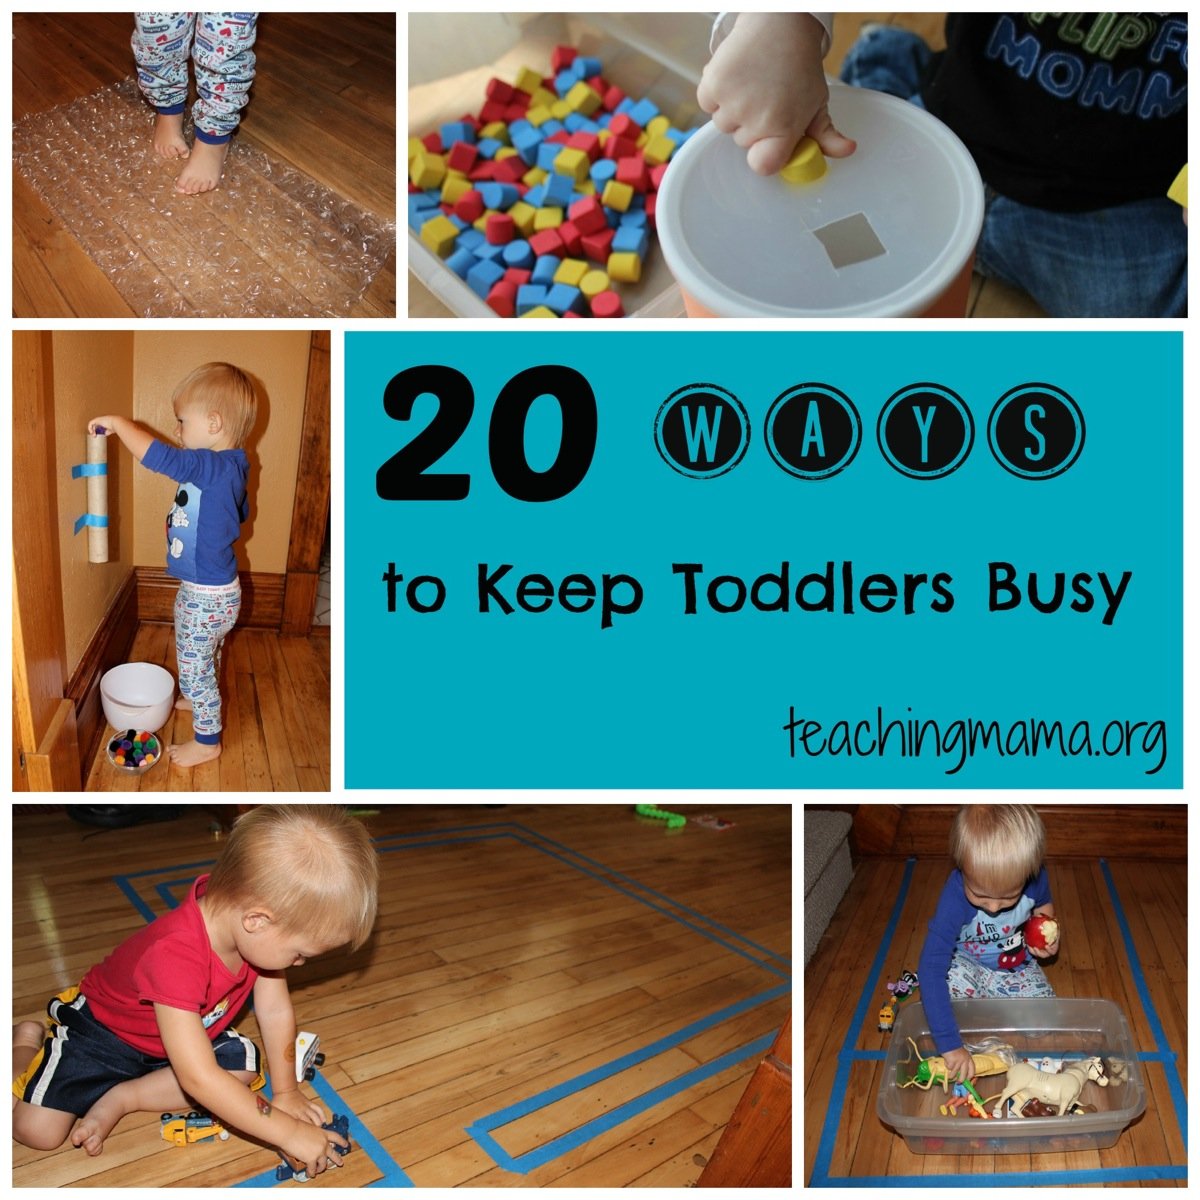 Pouring Station Activity for Toddlers - Busy Toddler